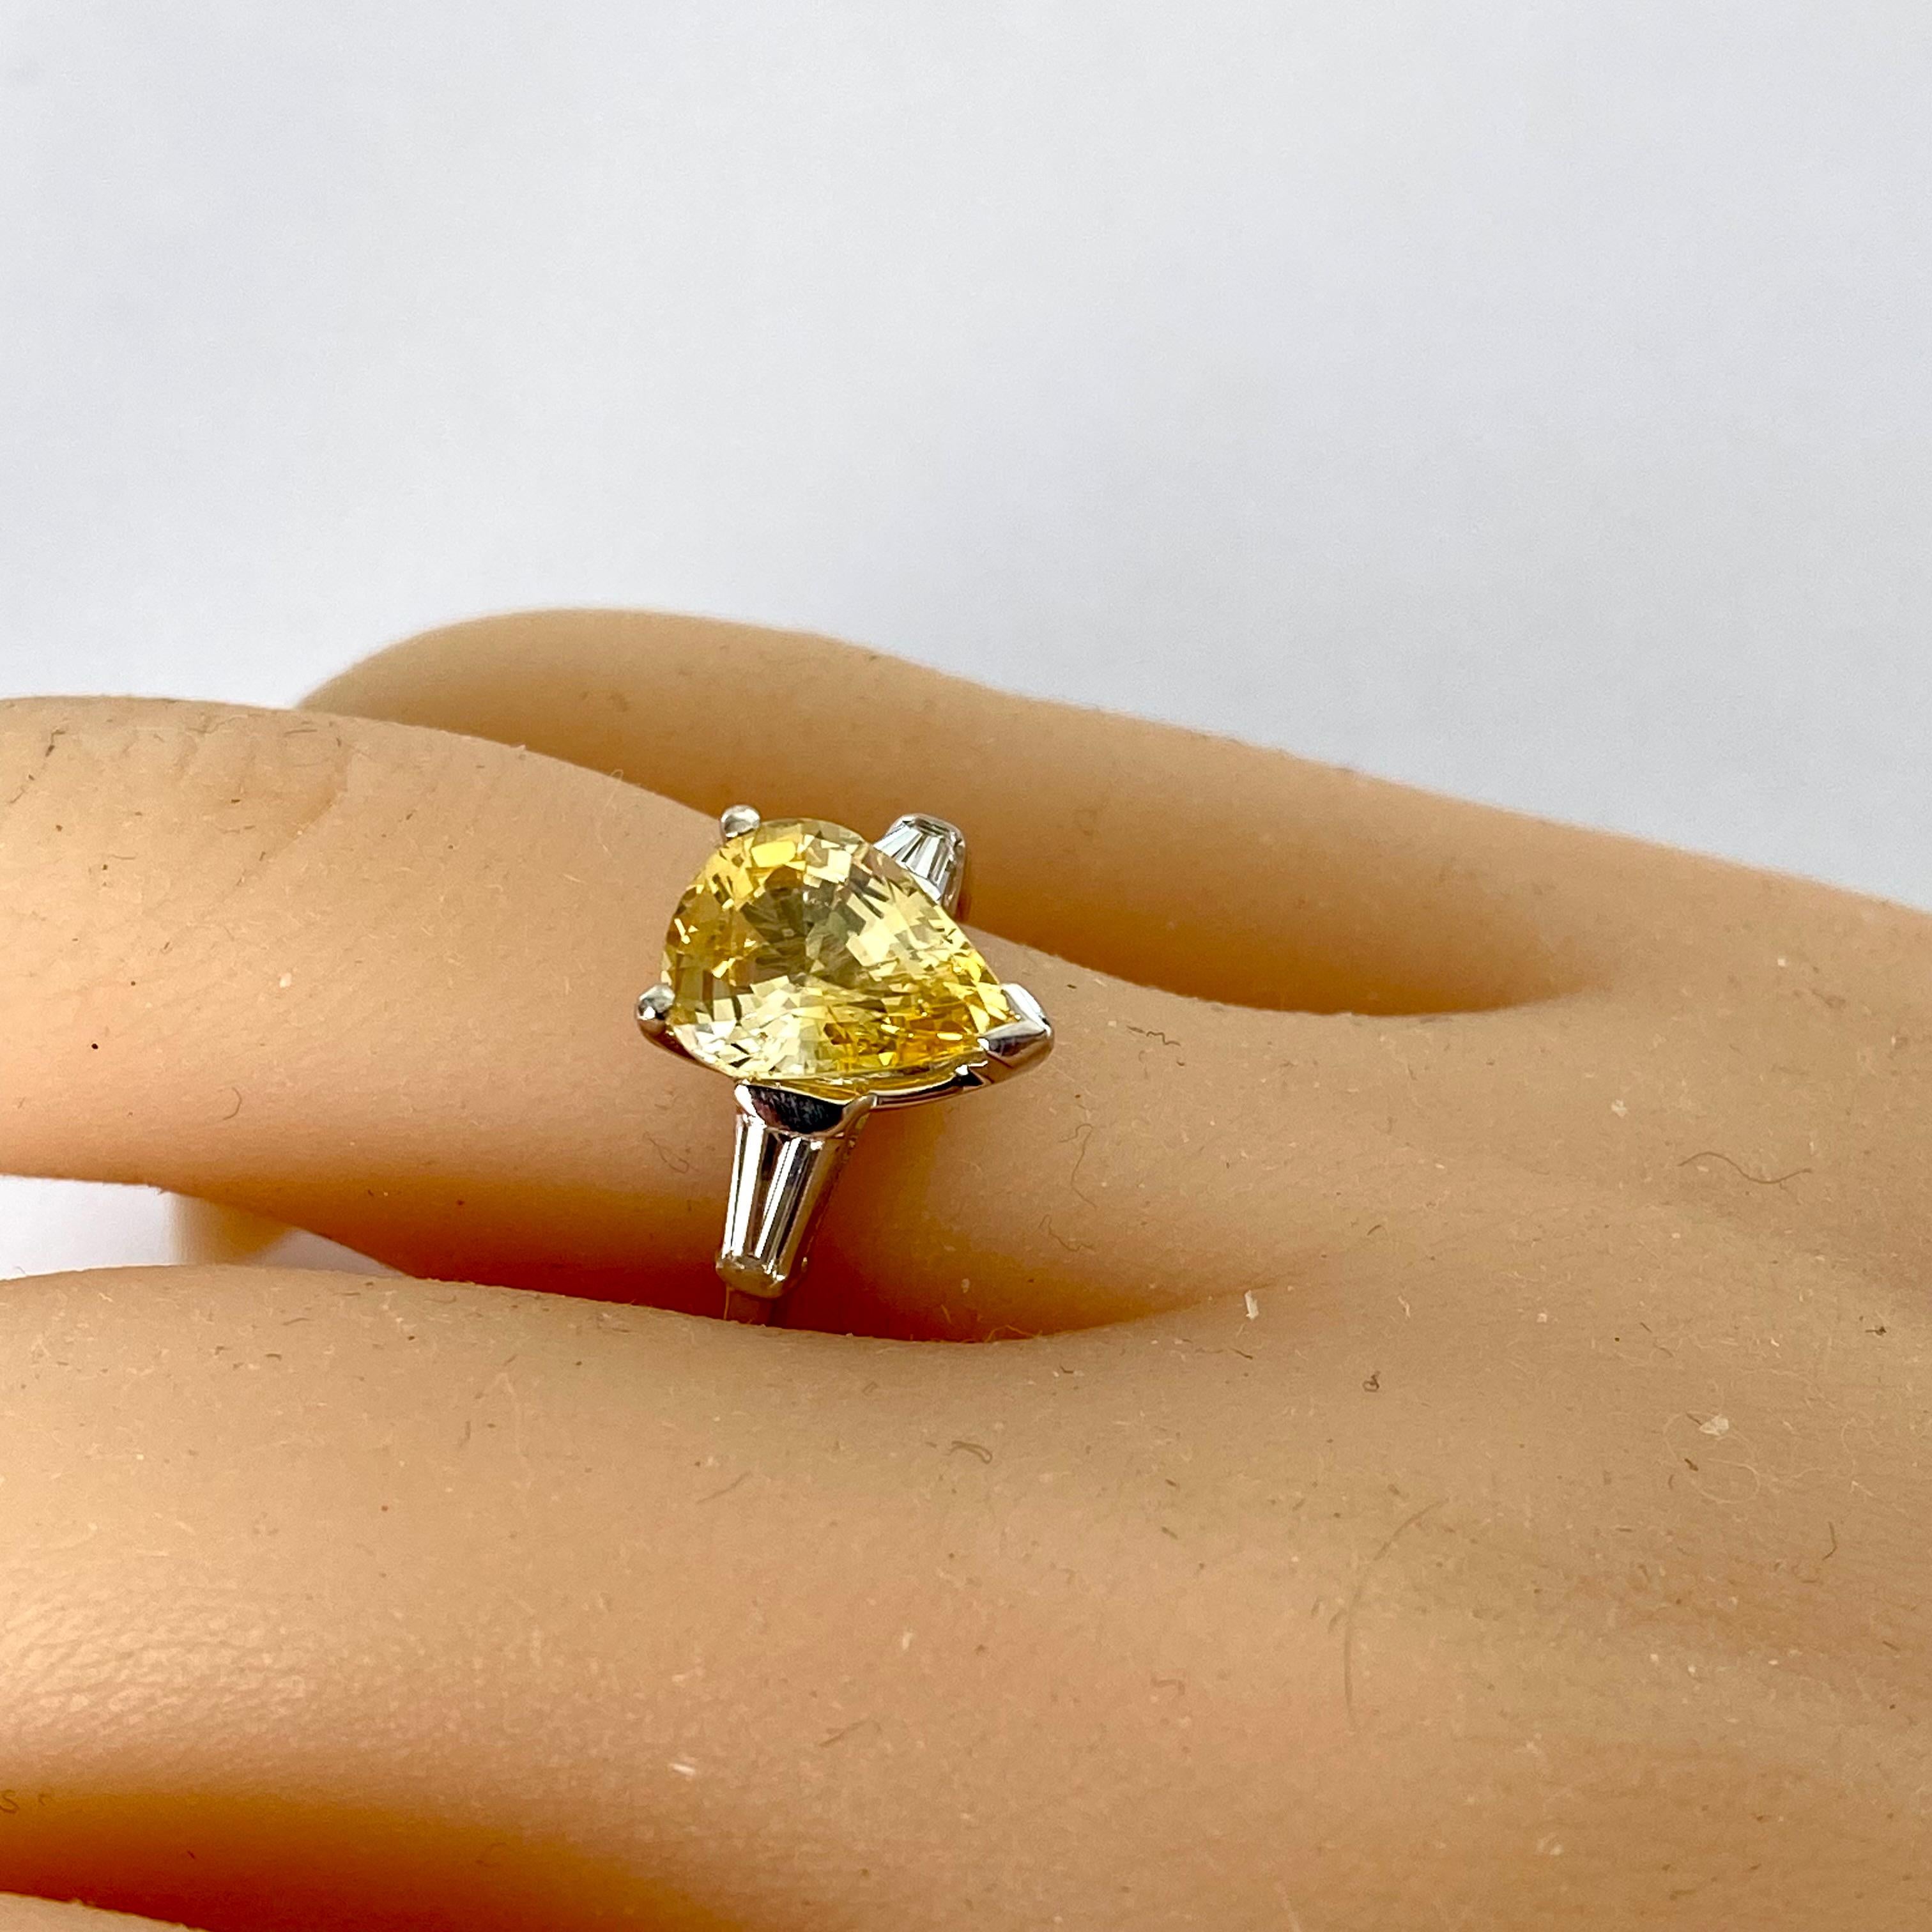 Elevate your love story with this exquisite Platinum Engagement Ring featuring a breathtaking Pear-Shaped Yellow Ceylon Sapphire and two dazzling Tapered Baguette Diamonds. Crafted to perfection, this ring embodies elegance, sophistication, and